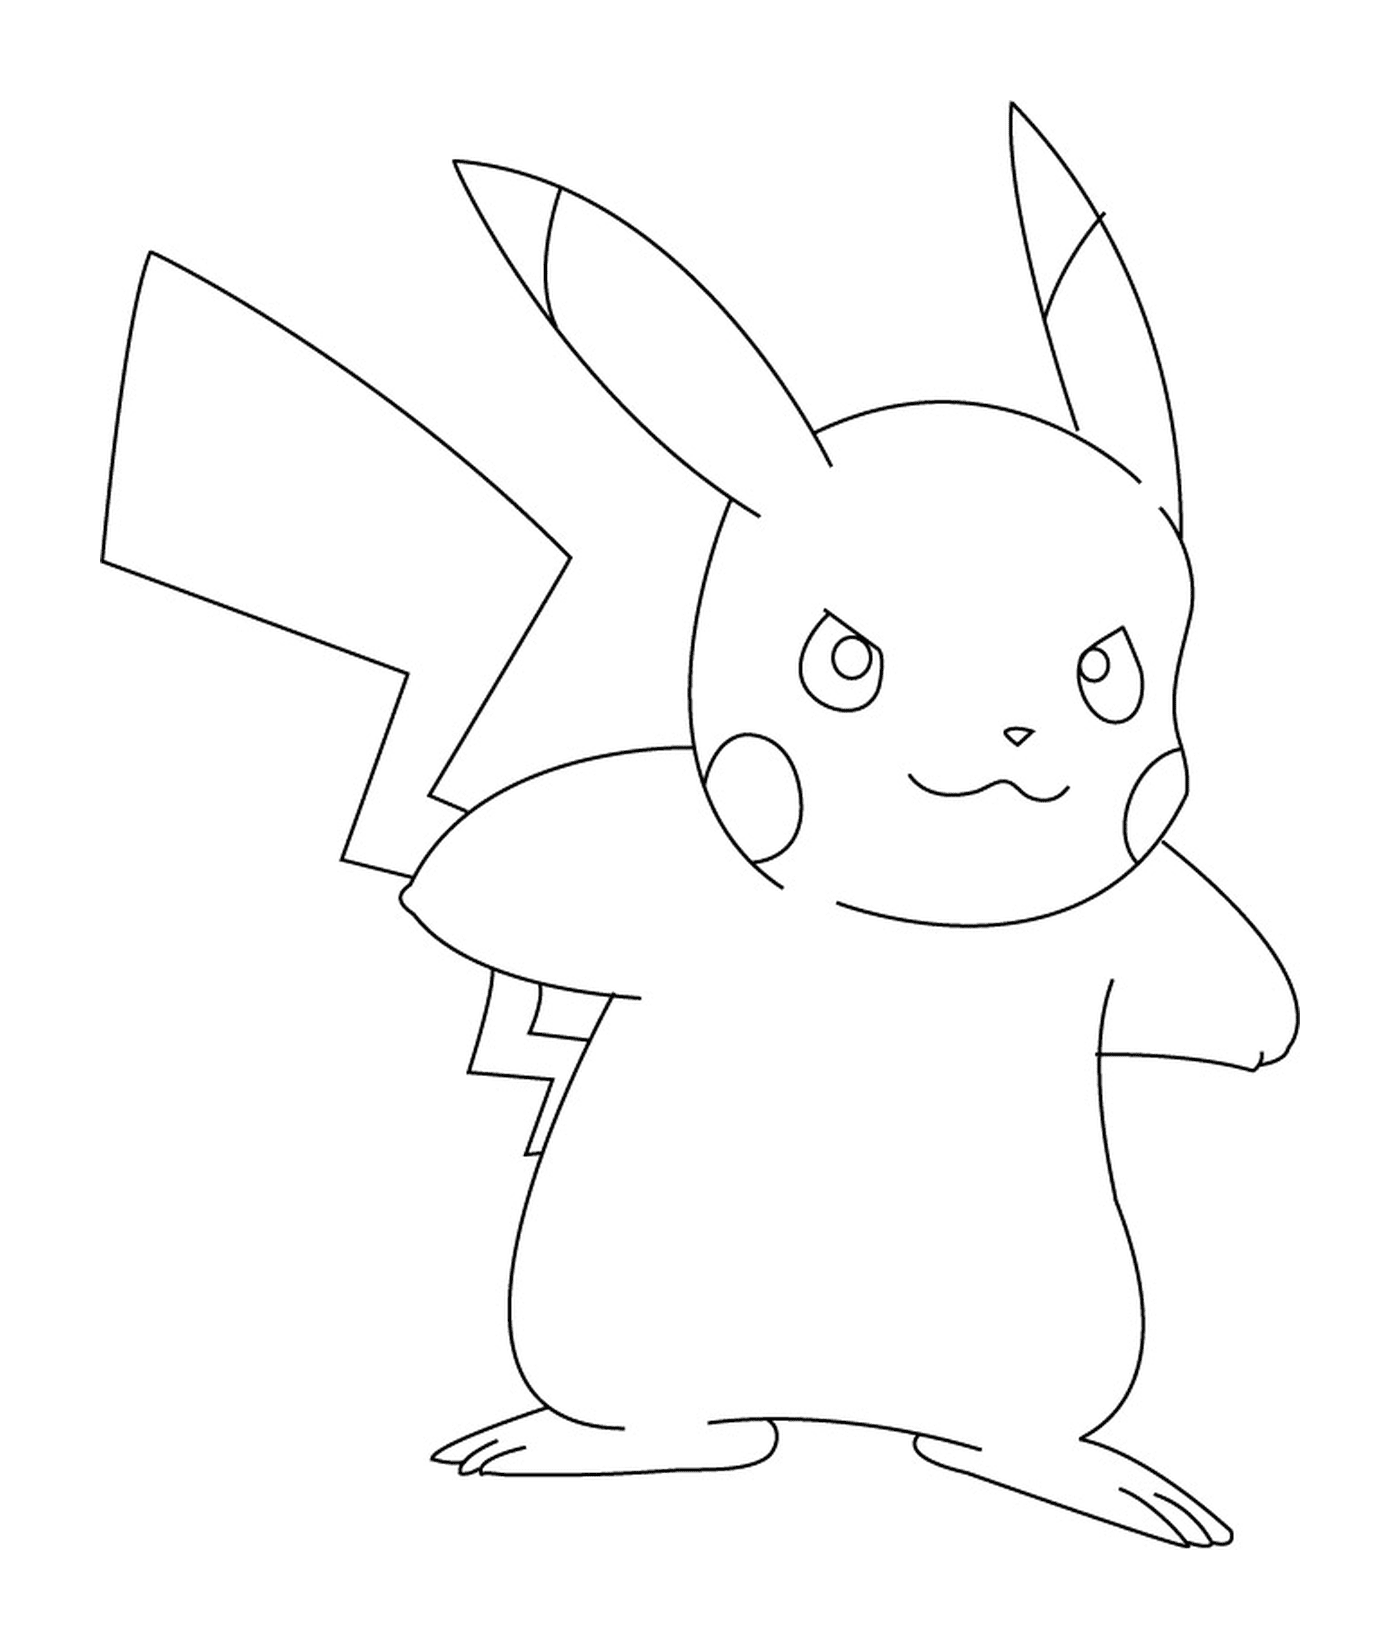  Pikachu with a mischievous expression 